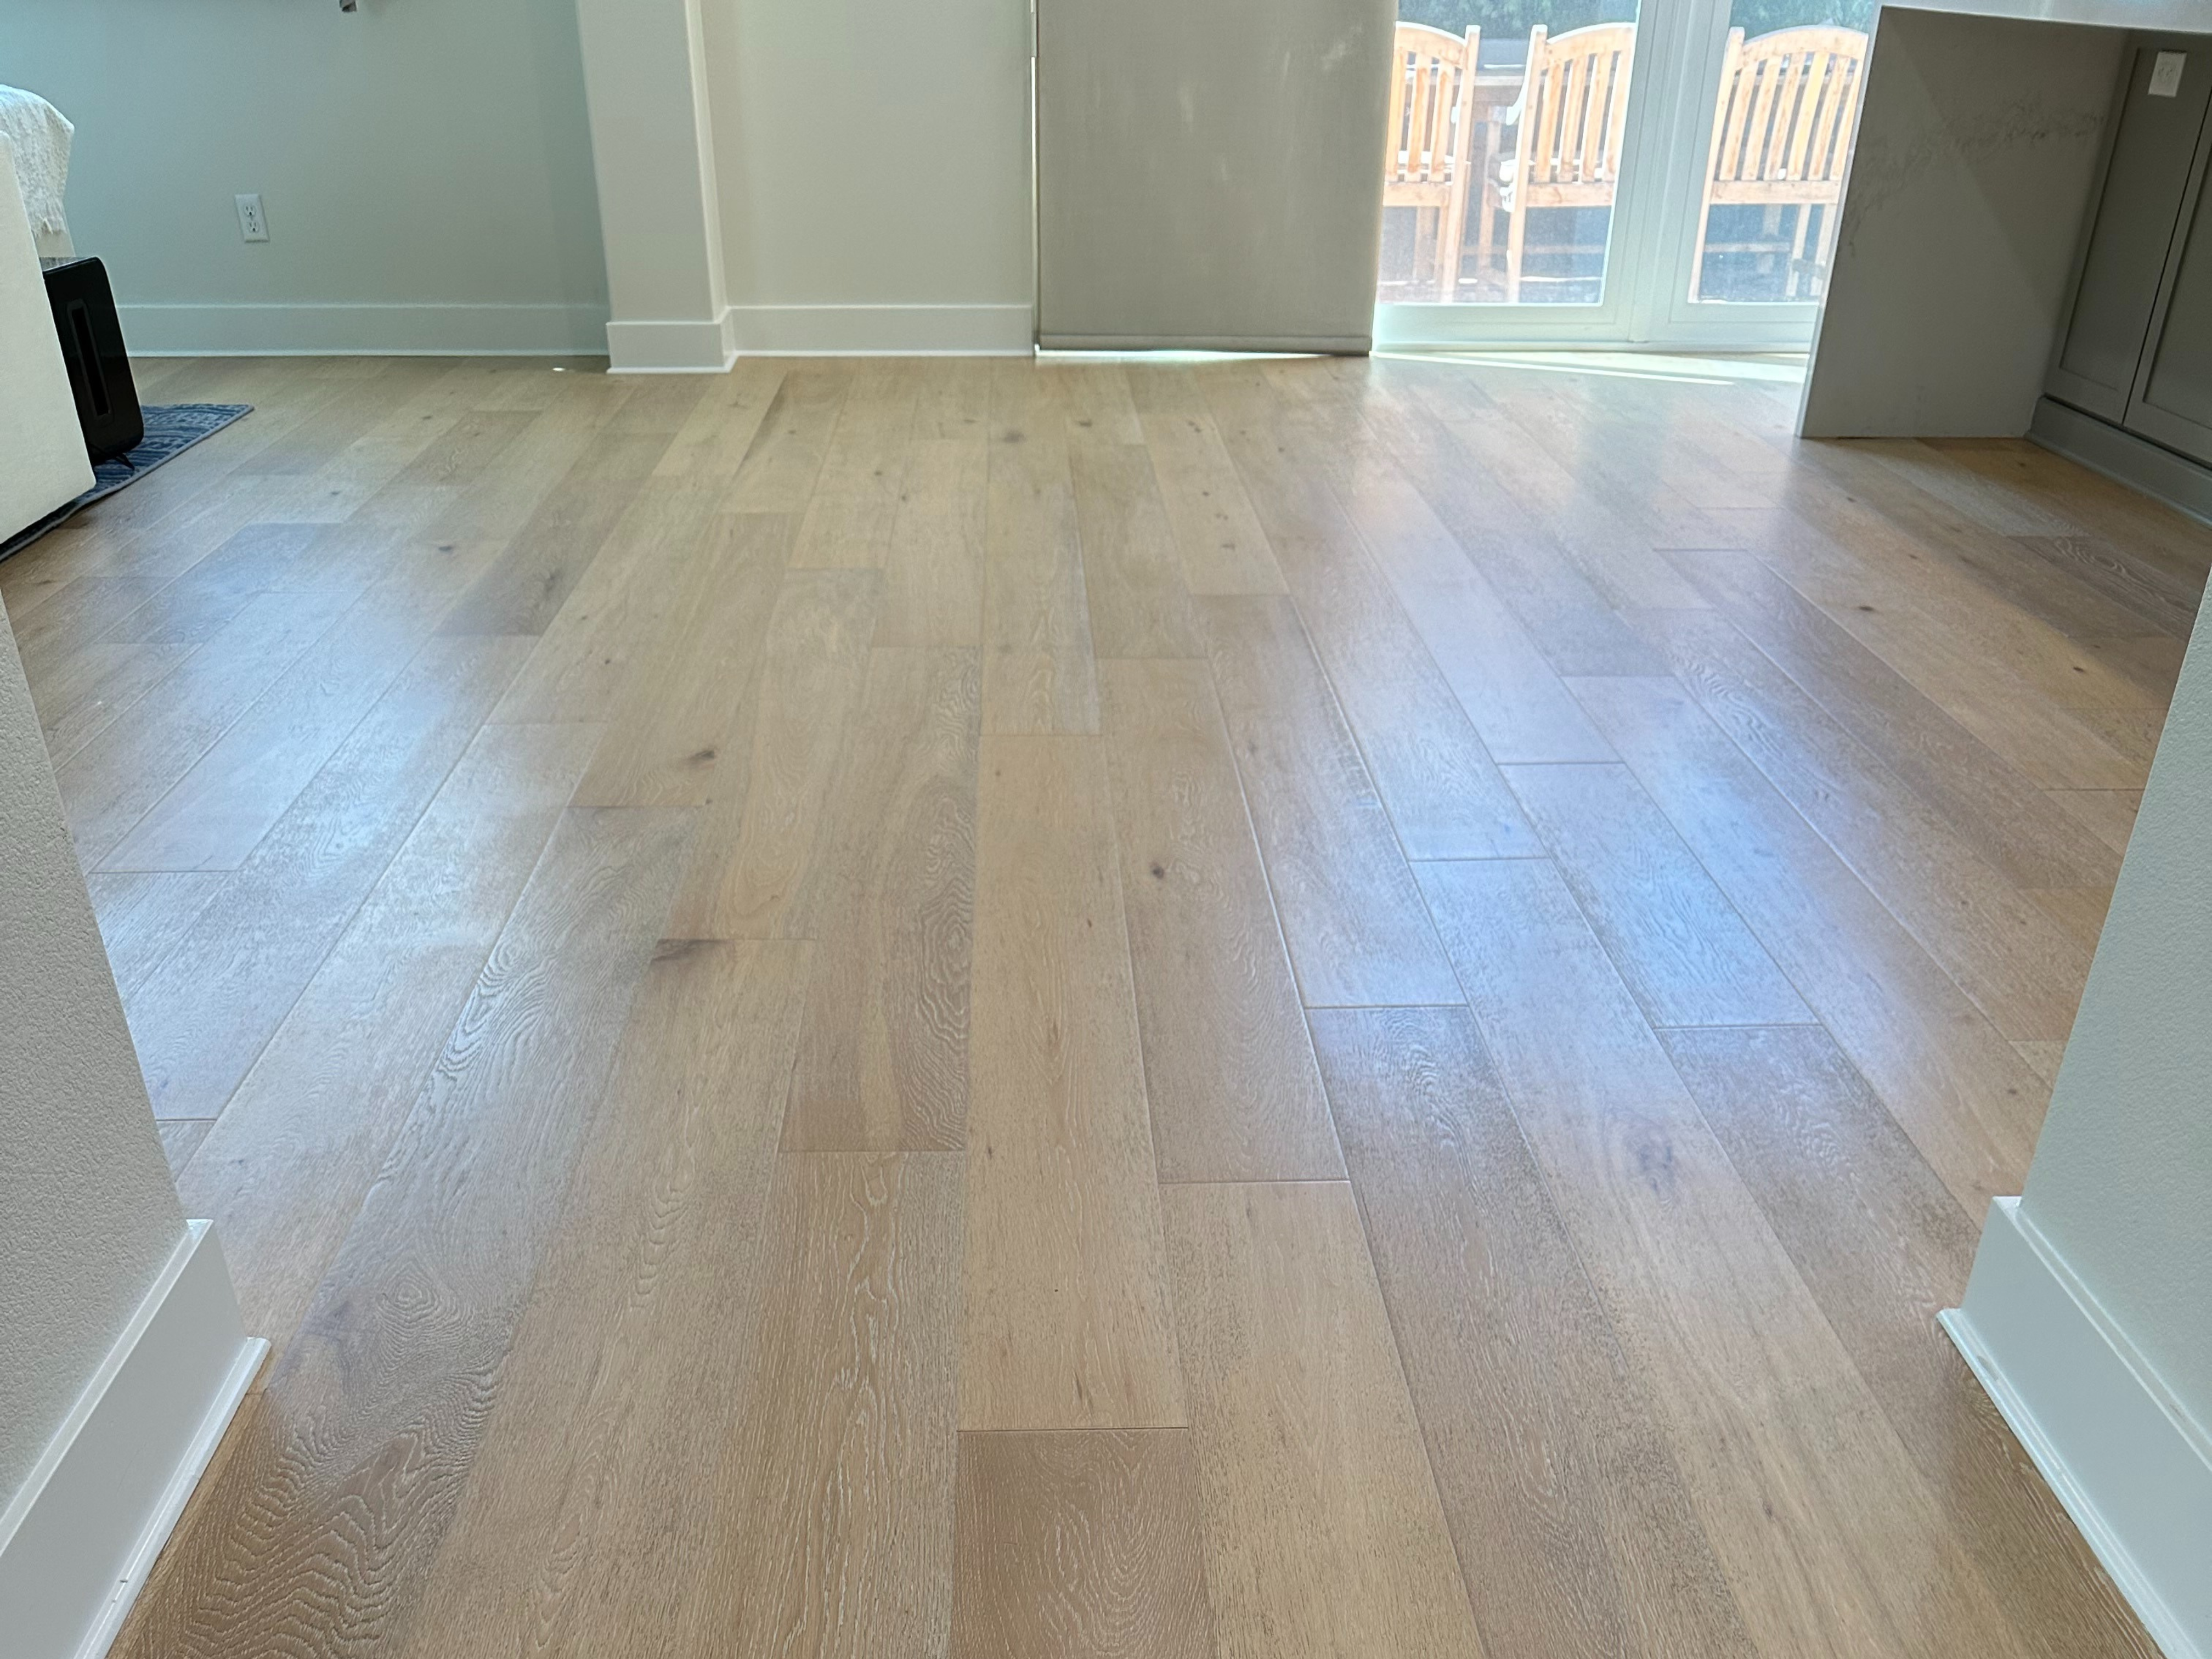 Hardwood Floor After Cleaning